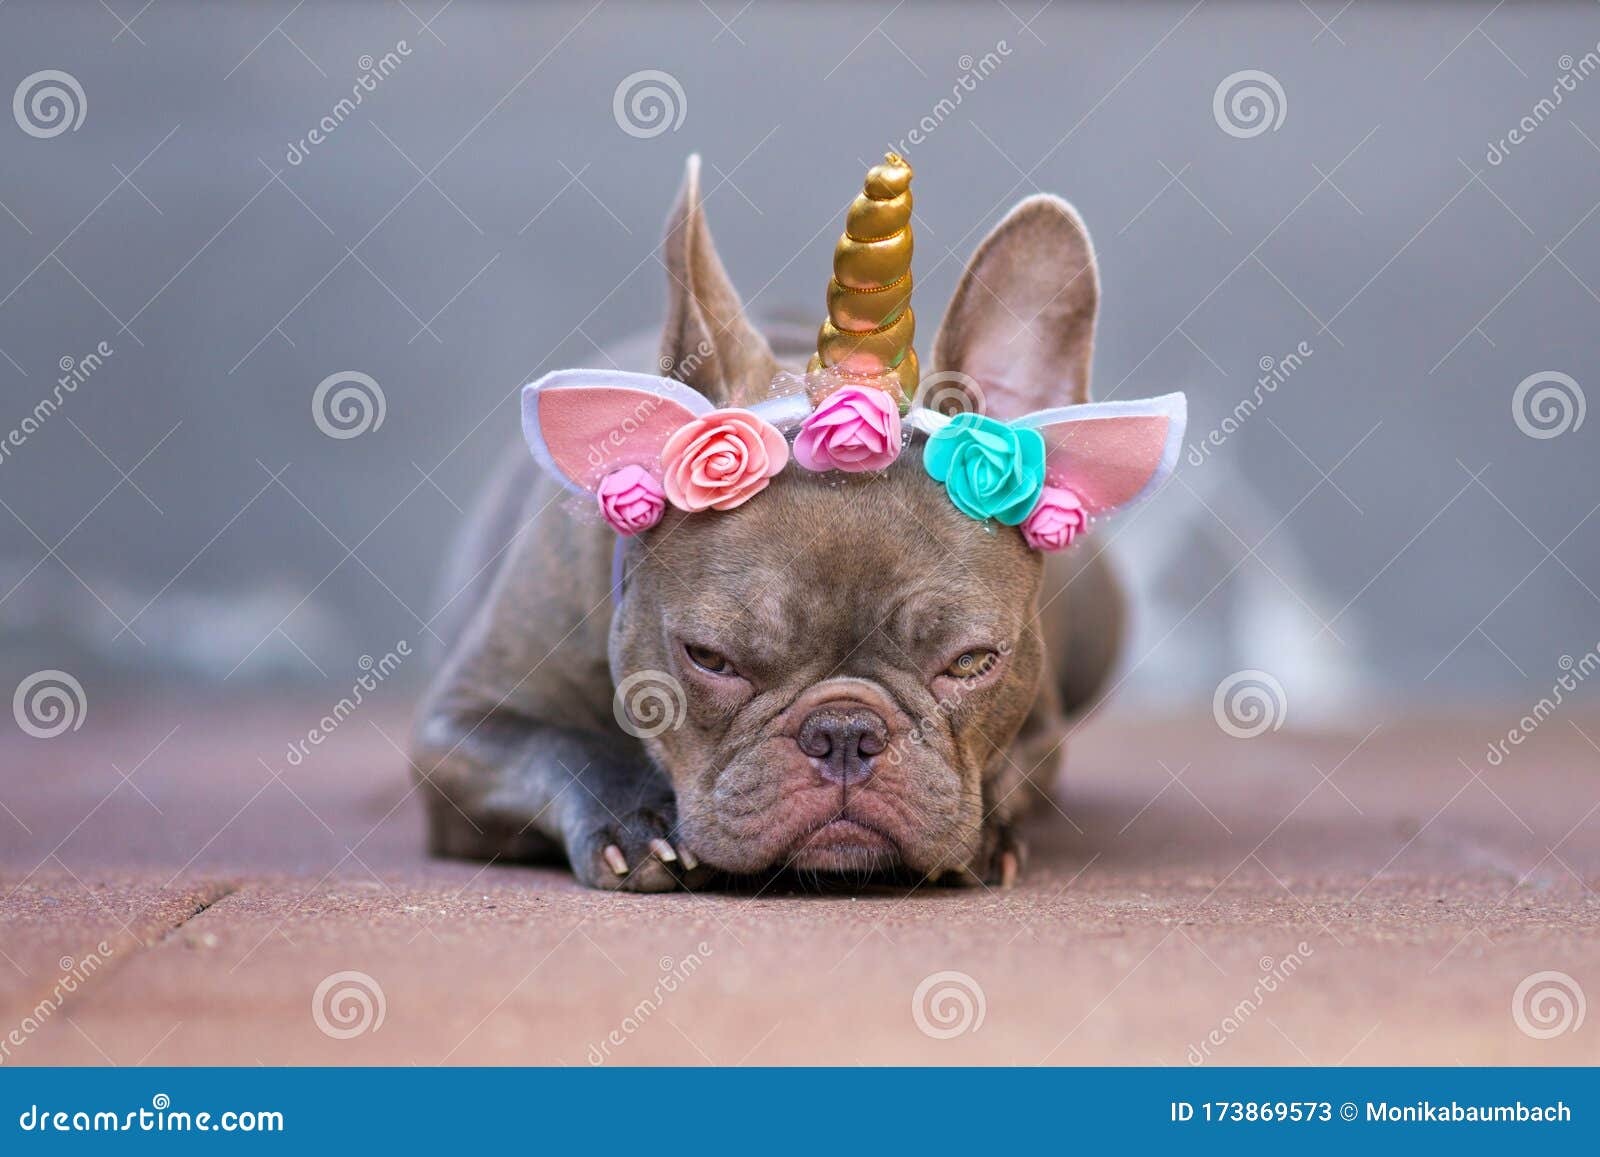 grumpy french bulldog dog with angry facial expression dressed up as unicorn wearing headband with  flowers and horn